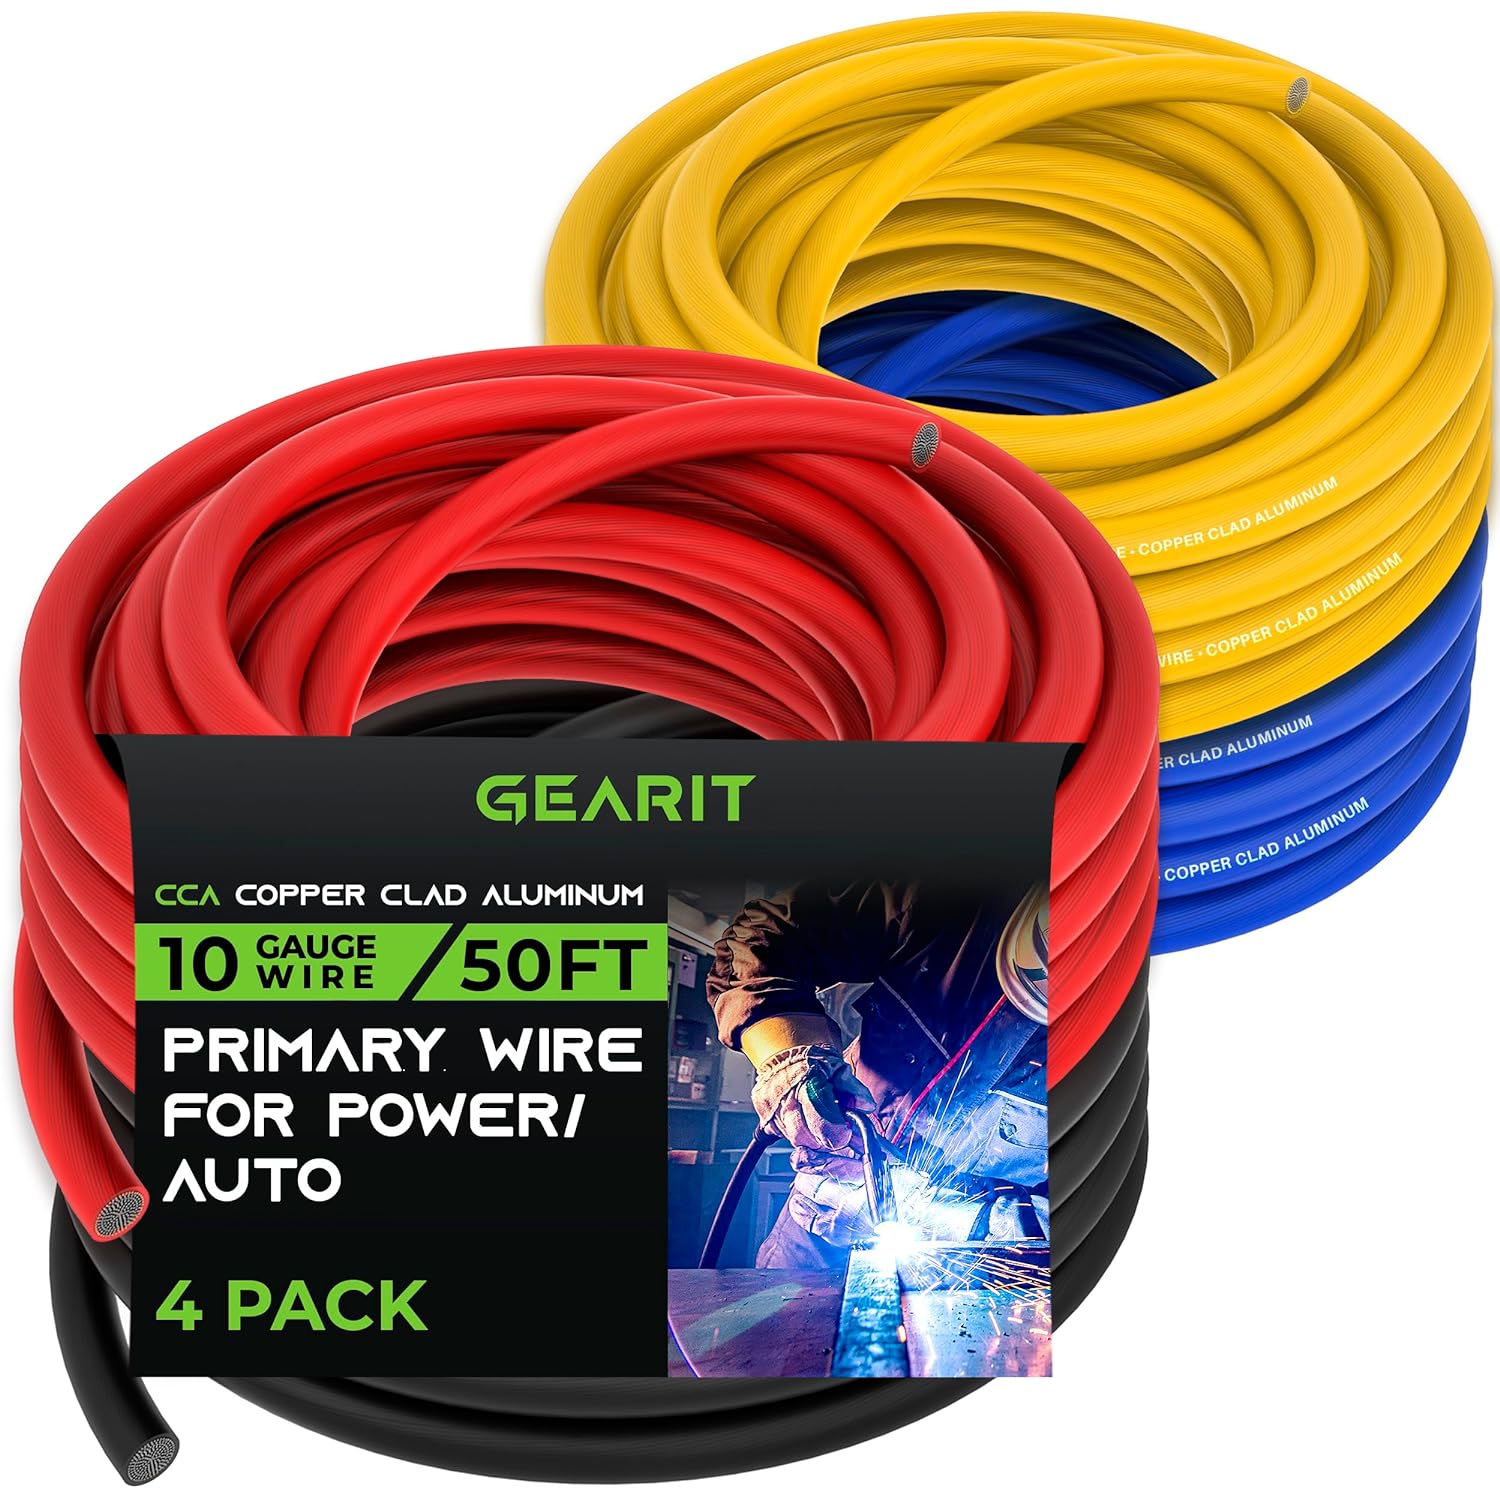 GCP Products GCP-US-578109 10 Gauge Wire (50Ft Each- Black/Red/Blue/Yellow)  Copper Clad Aluminum Cca - Primary Automotive Power/Ground Battery Cable,  Ca…